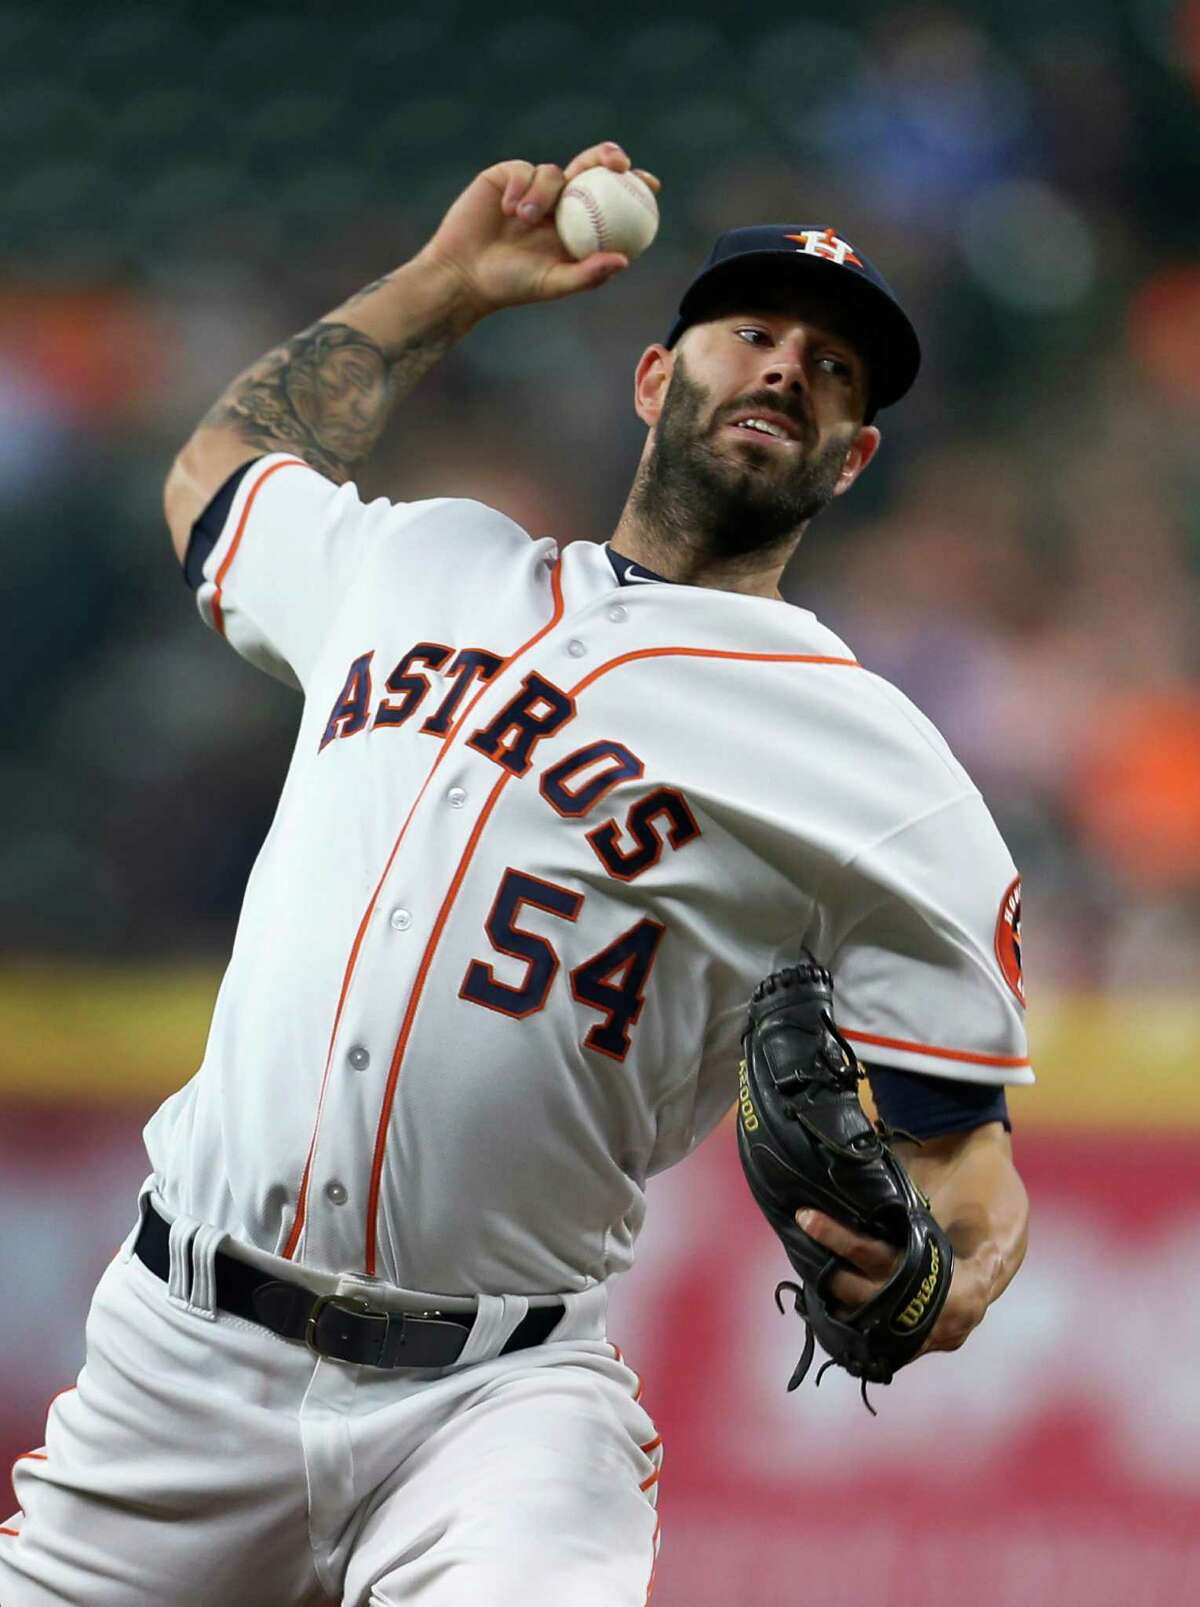 Starter Mike Fiers gave the Astros seven innings Monday night, giving up only one run on three hits.